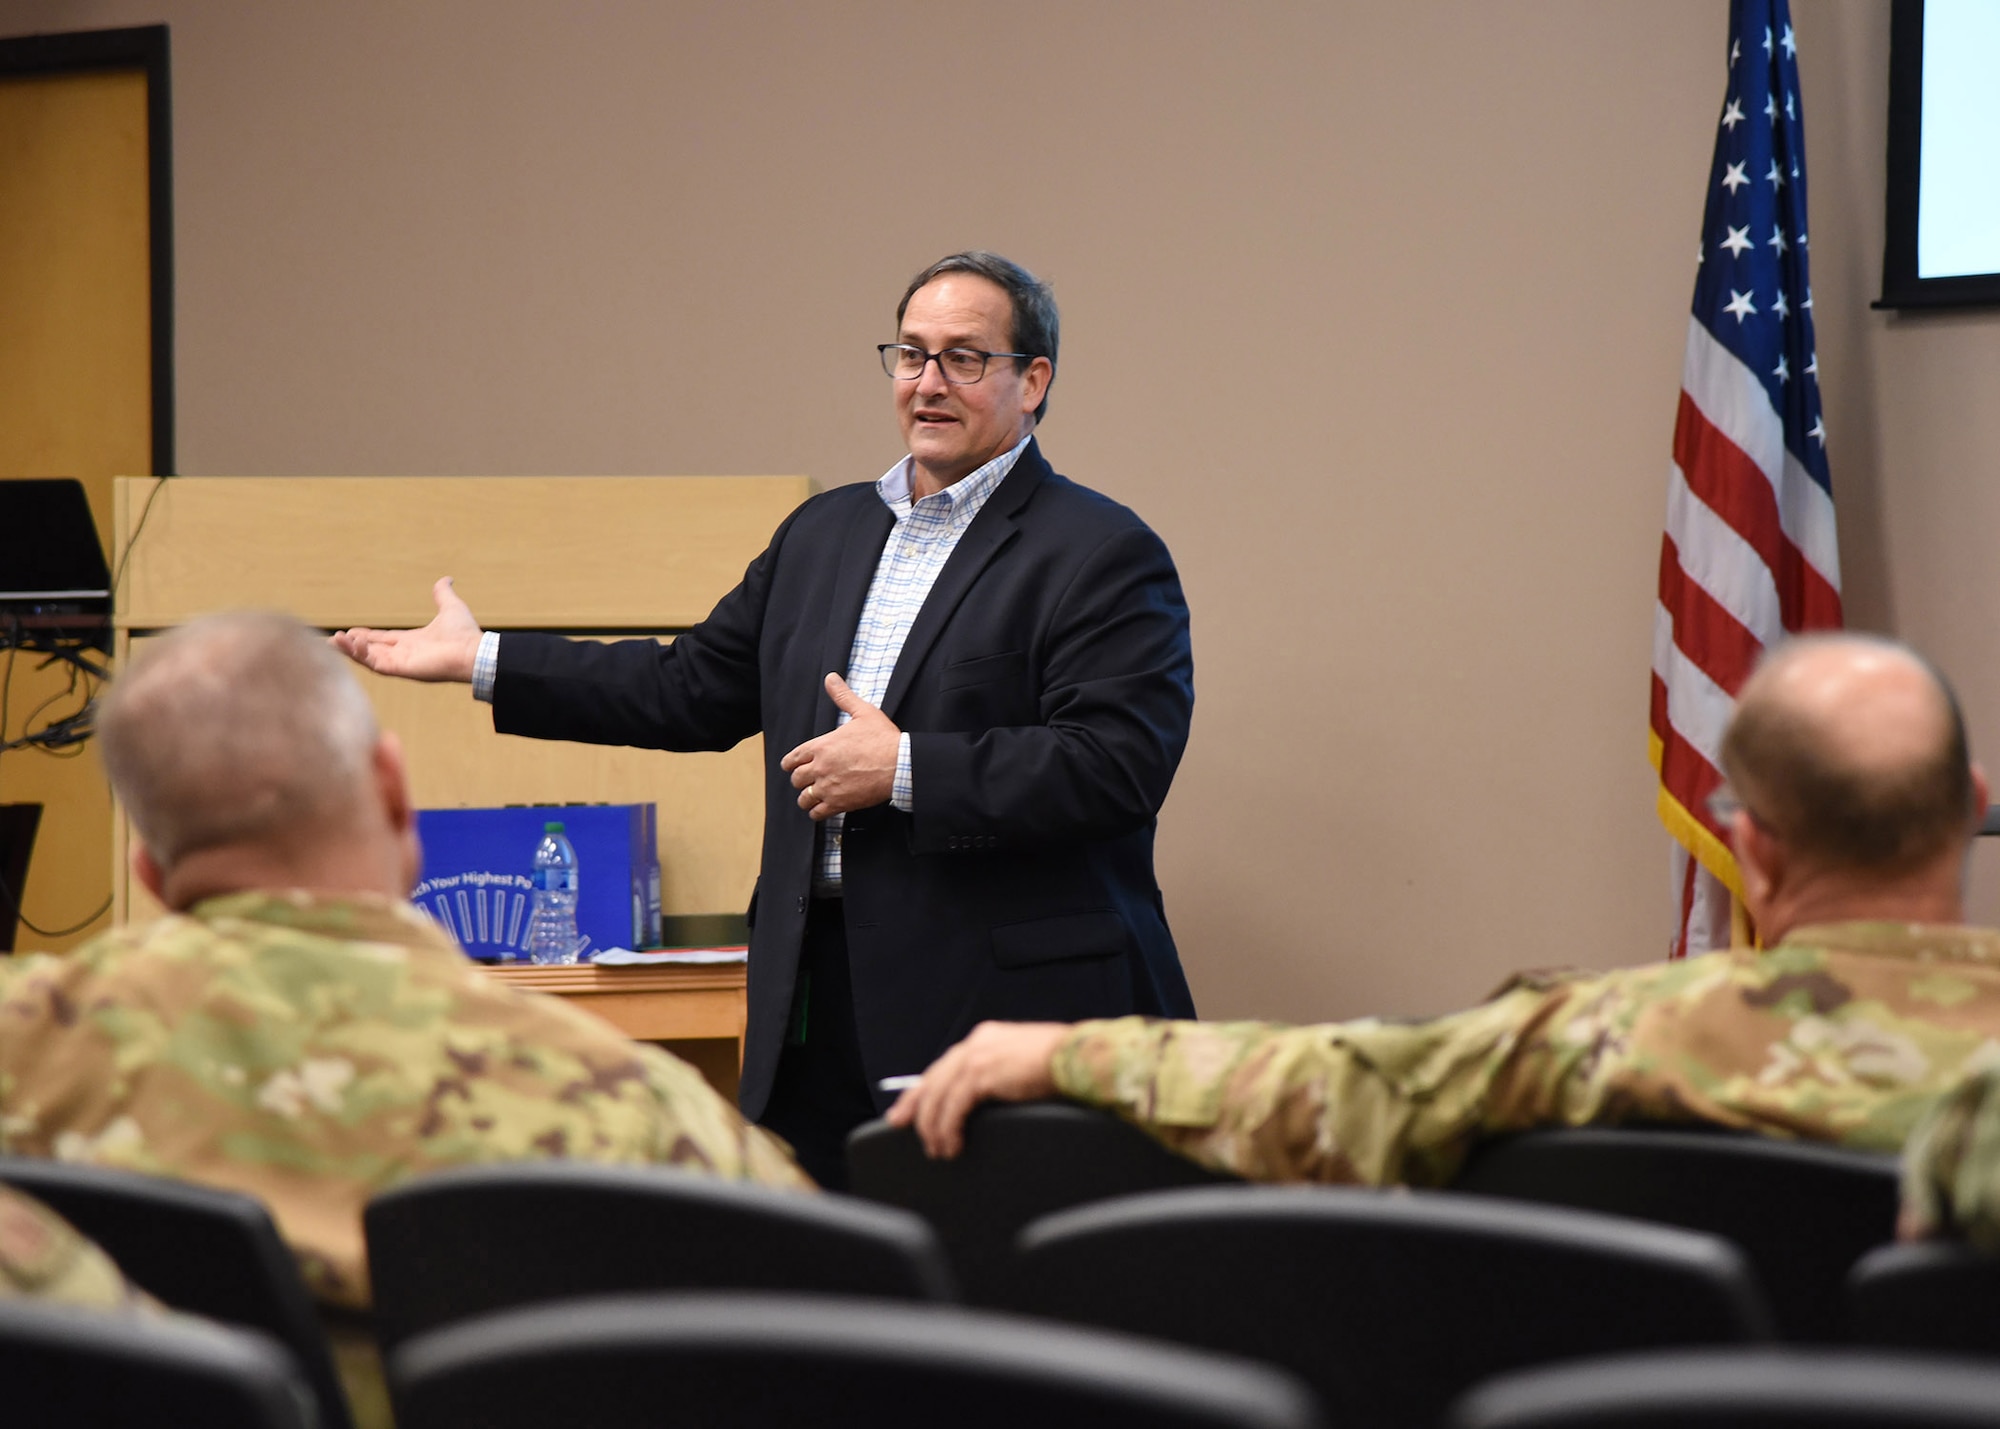 A man in gestures while speaking to a room full of Airmen